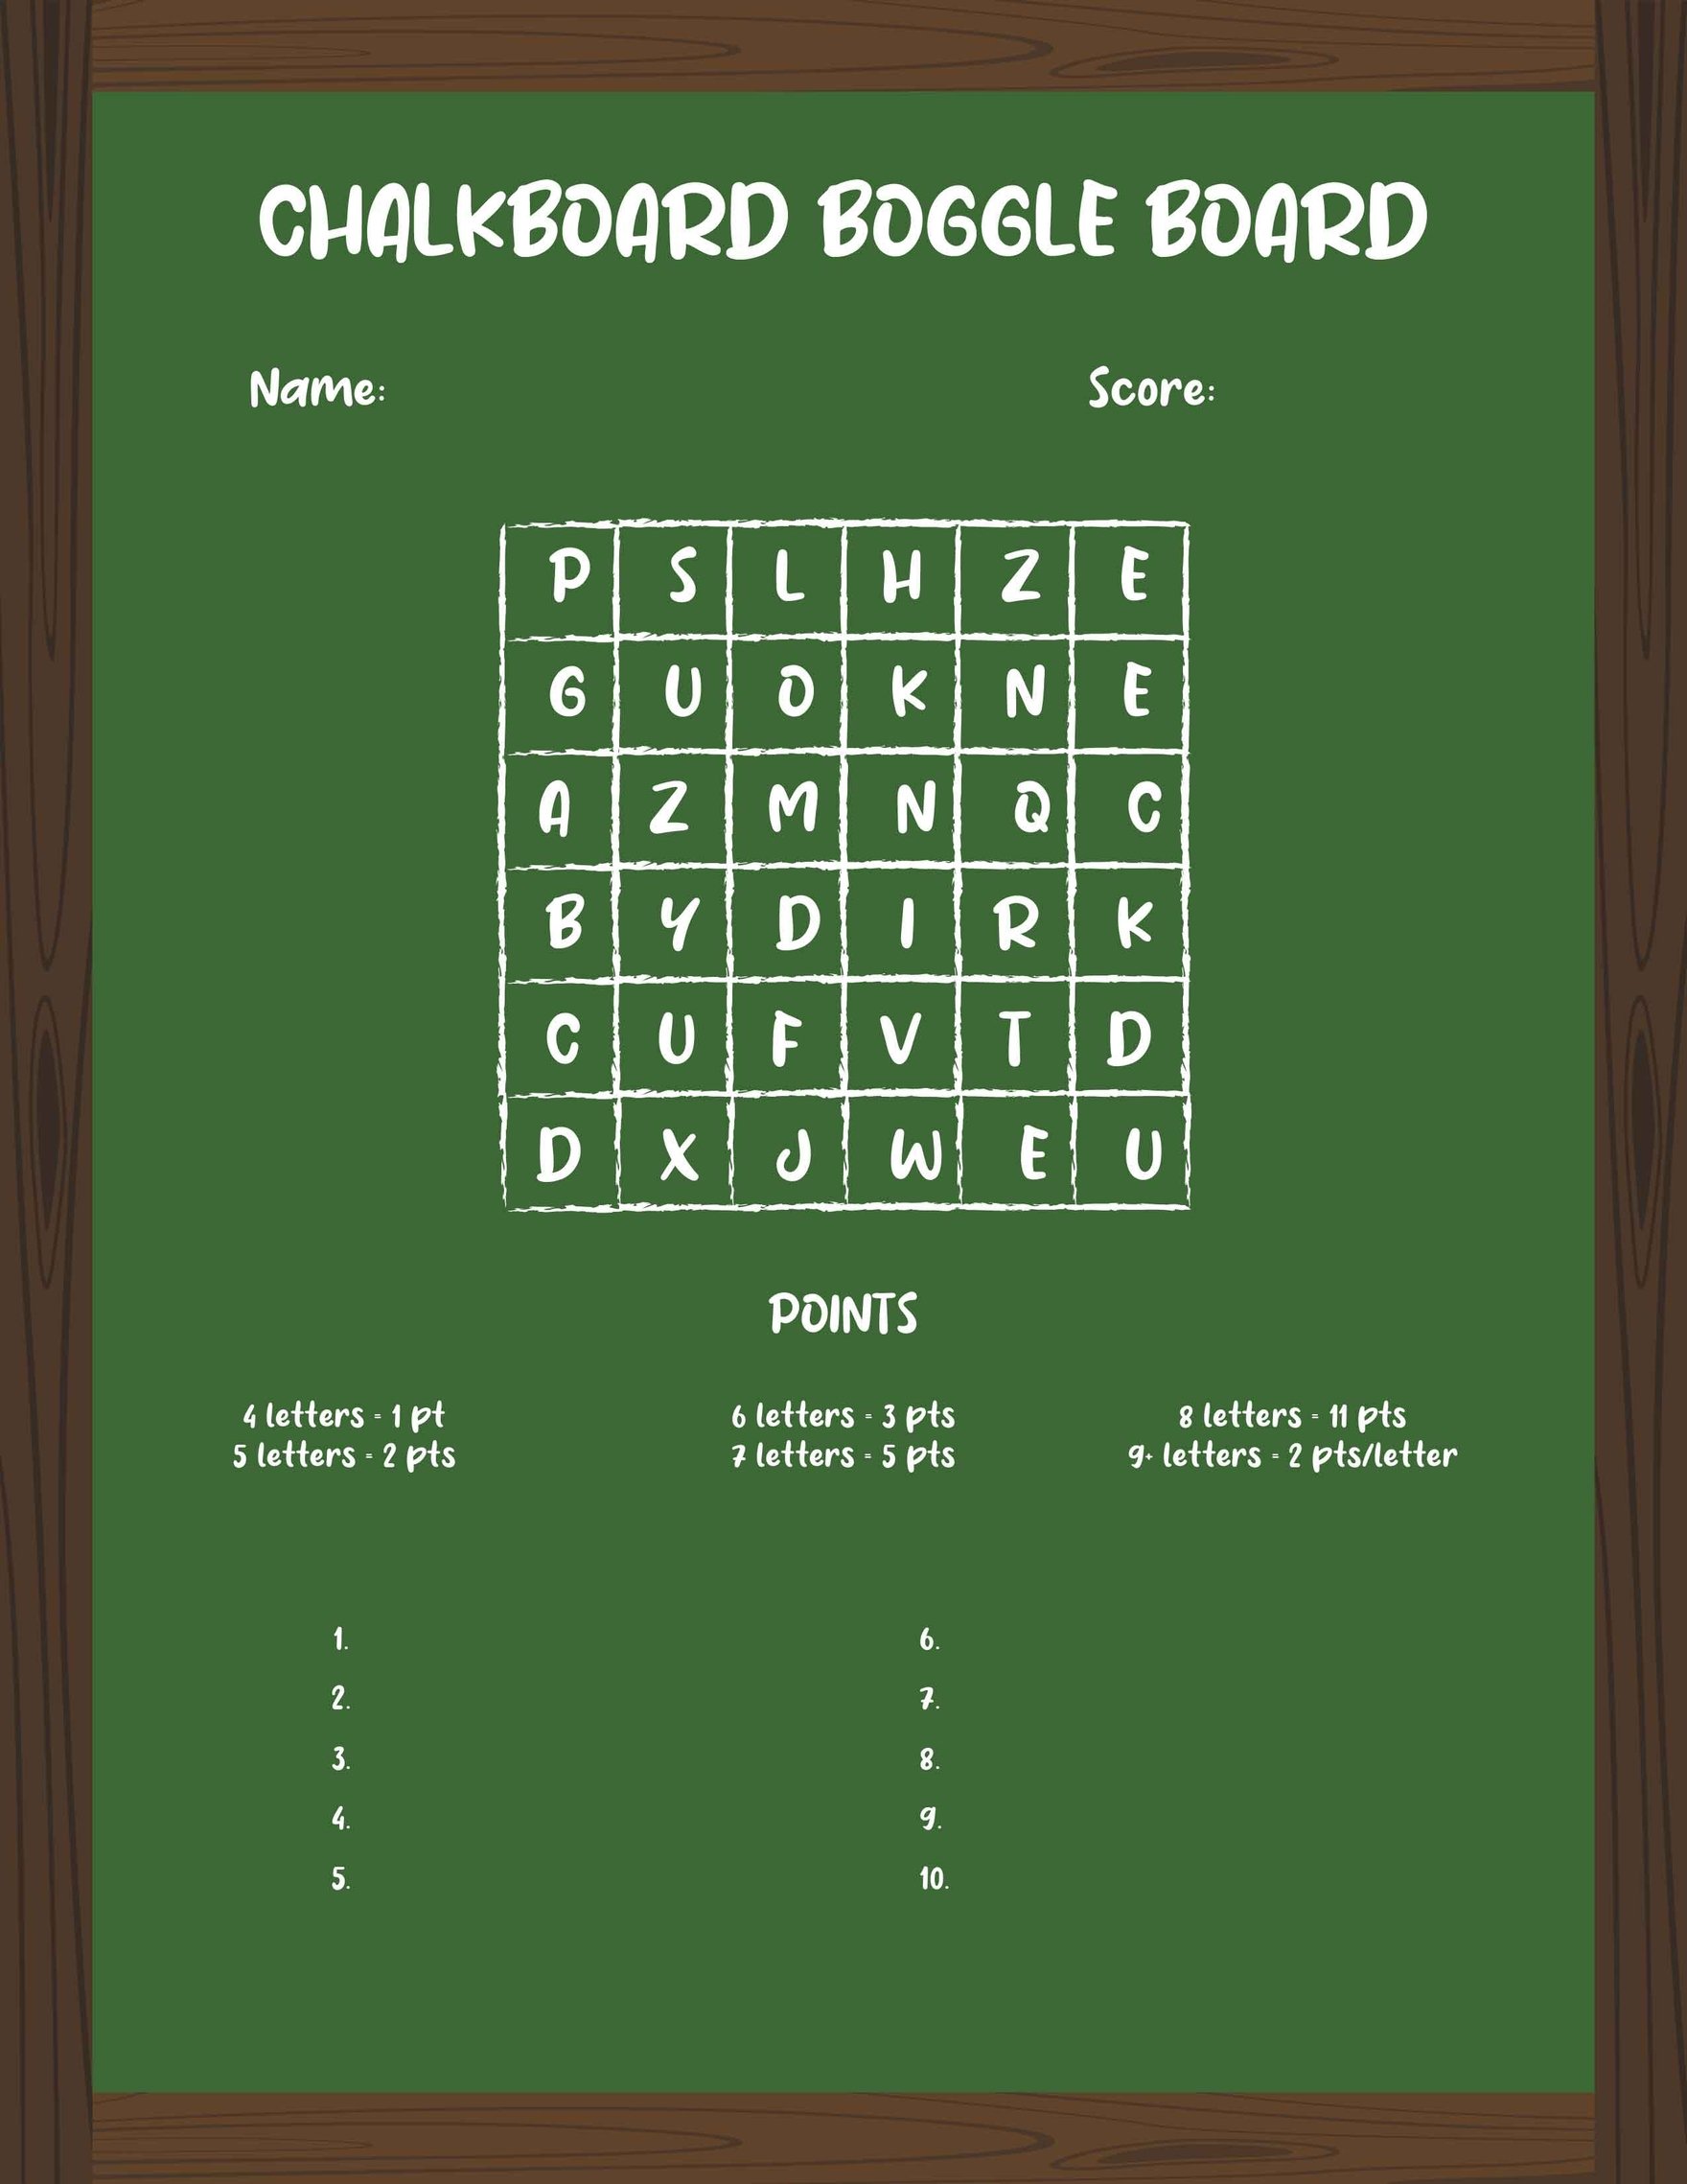 Chalkboard Boggle Board Template in Word, Google Docs, PDF, Apple Pages